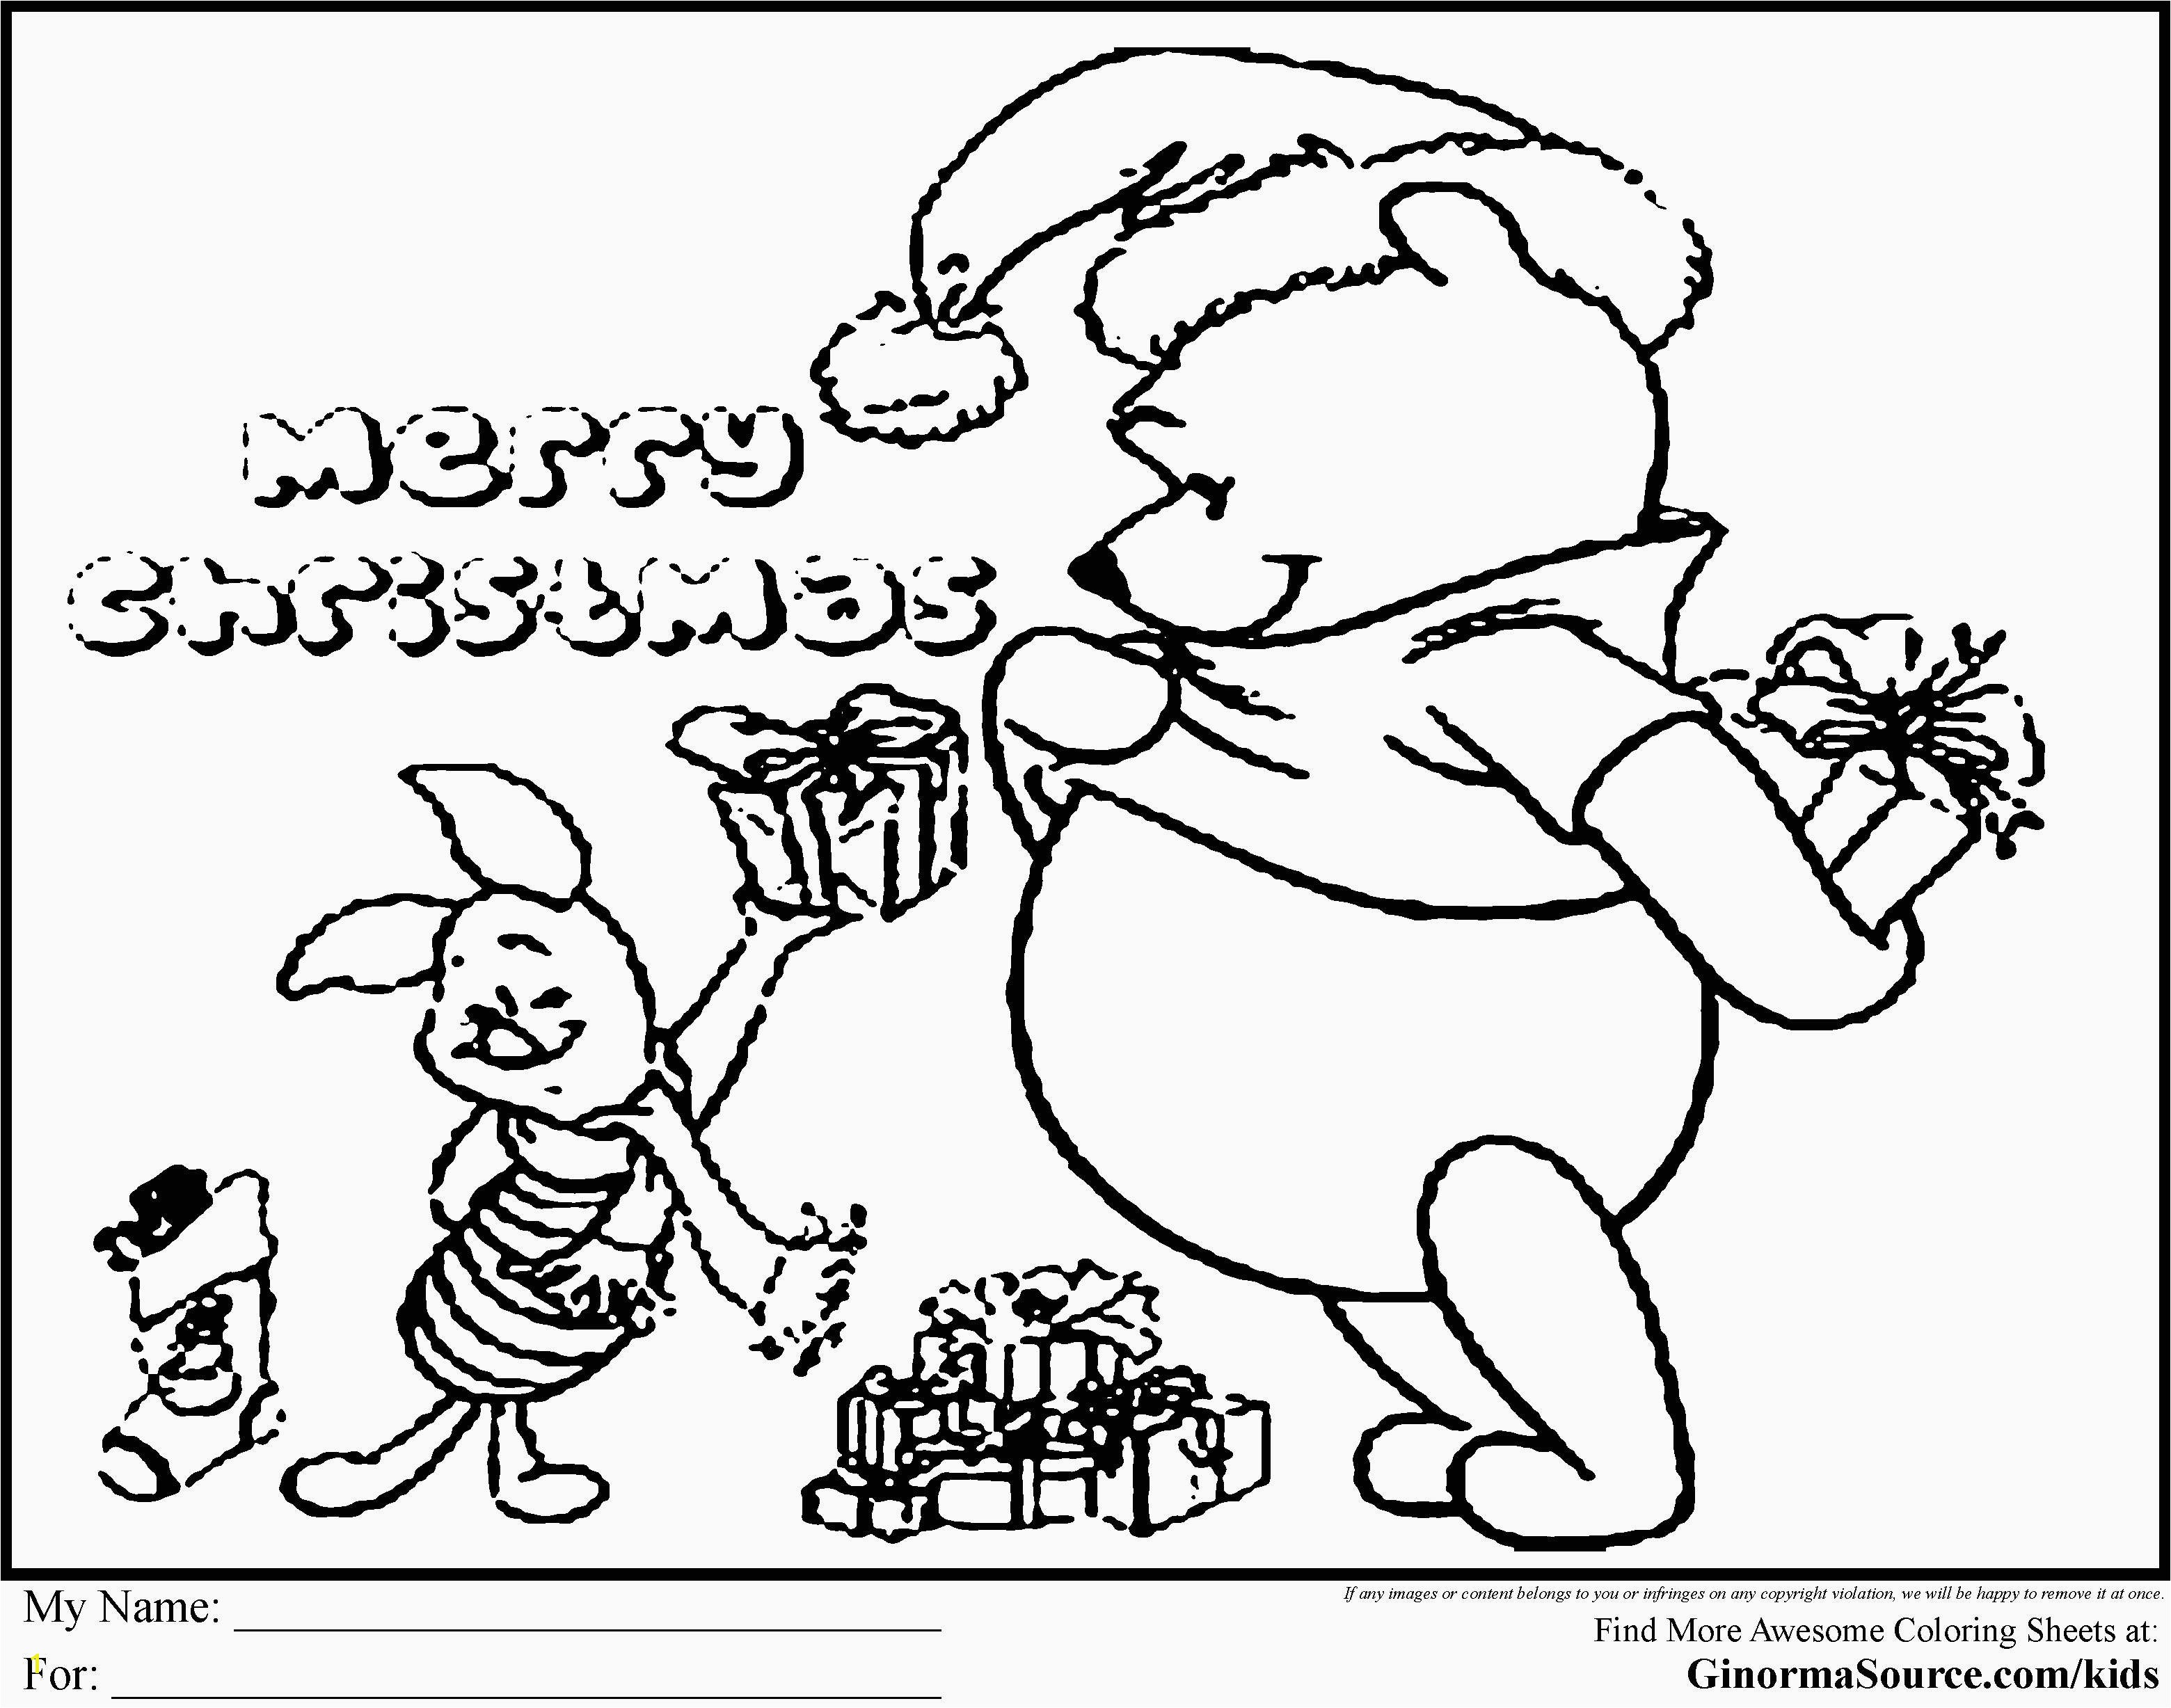 Winnie the Pooh Fall Coloring Pages Winnie the Pooh Fall Coloring Pages Fall Coloring Pages to Print